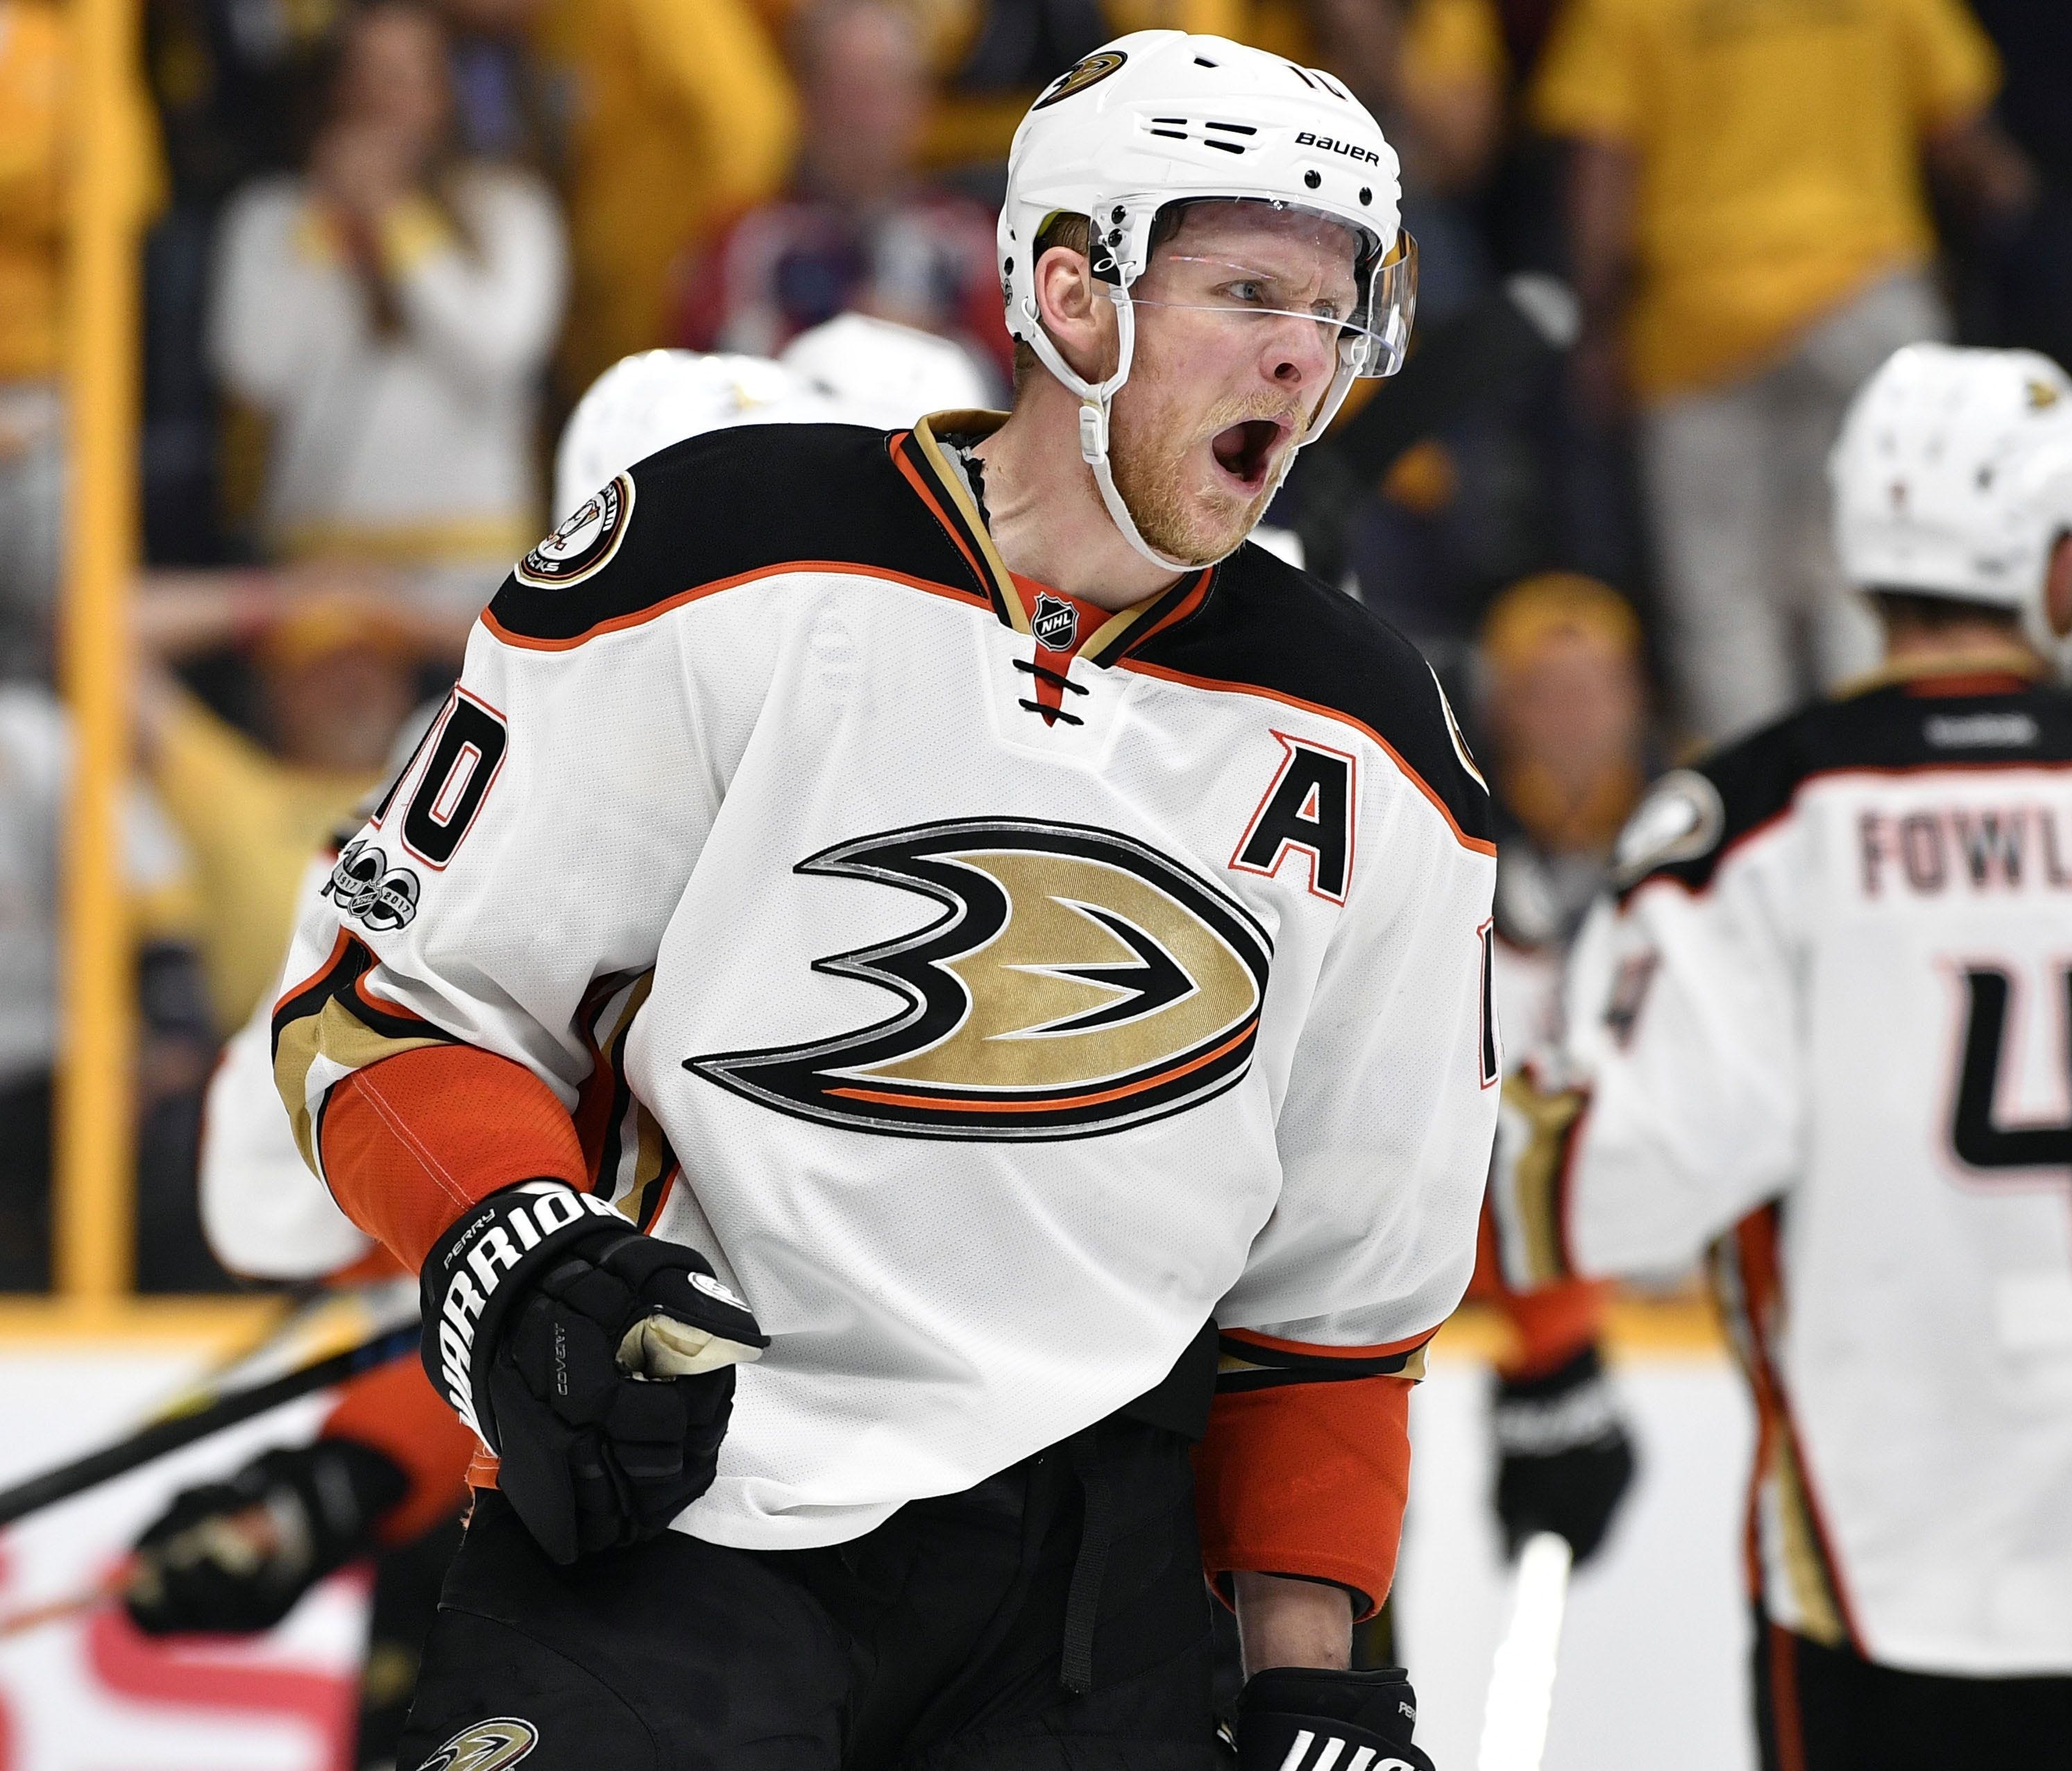 Corey Perry tied the Western Conference finals with his overtime winner.